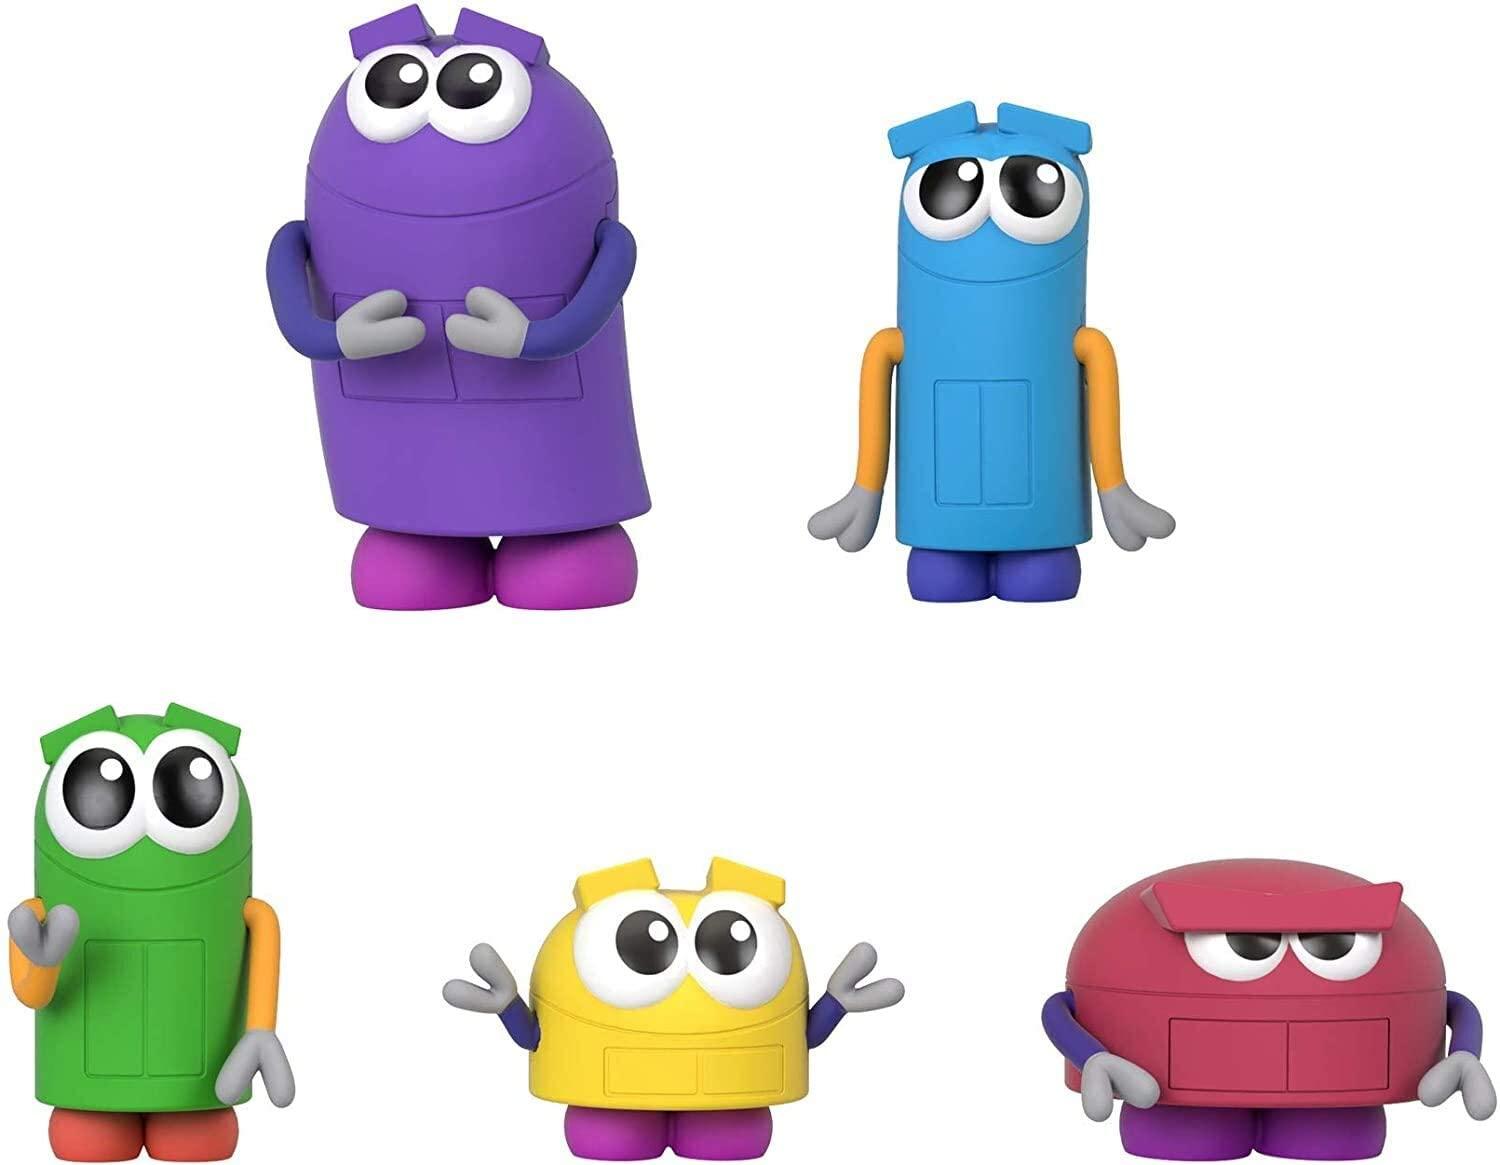 5-Pack Fisher-Price StoryBots Figures for $3.97